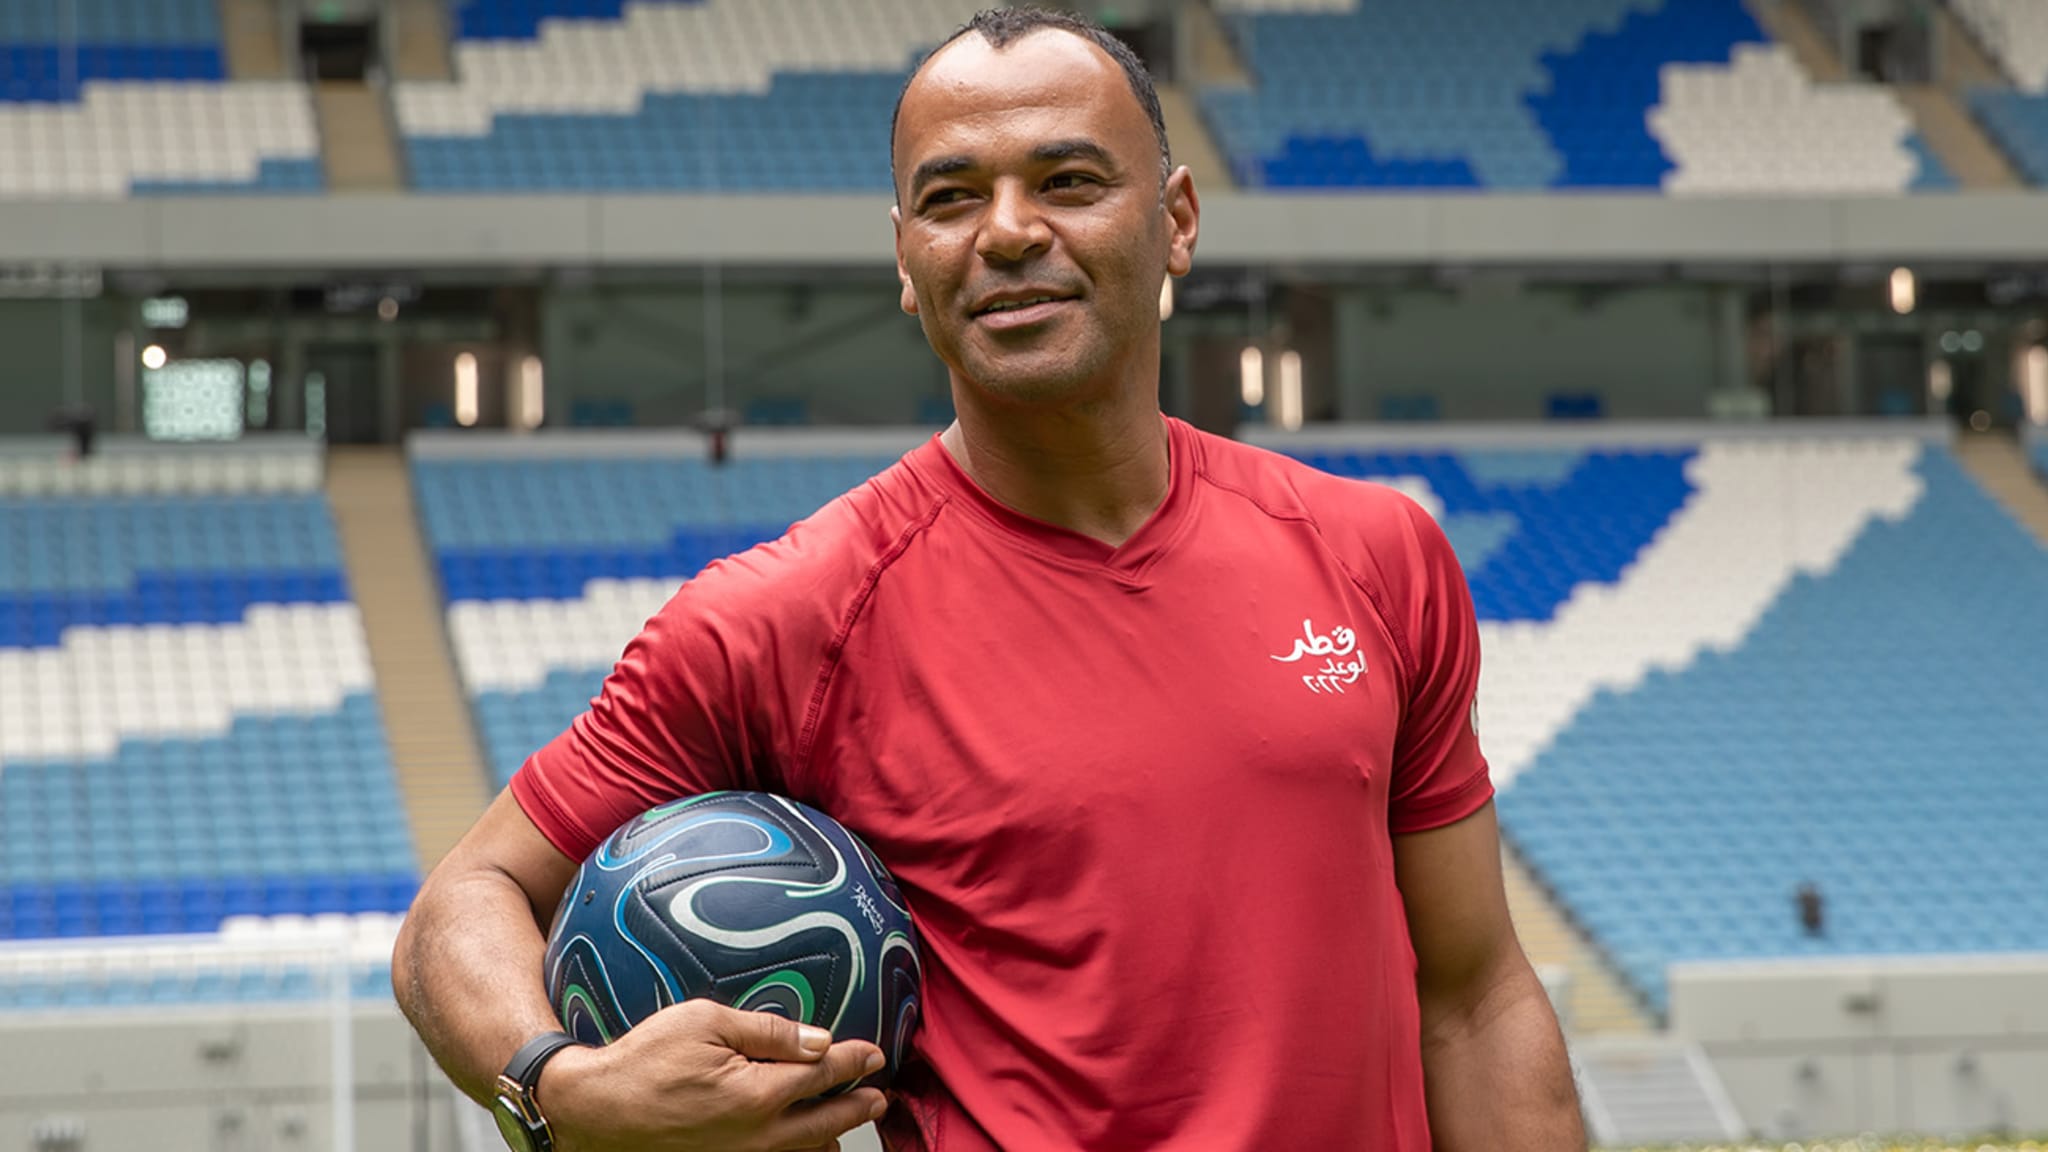  2022 World Cup in Qatar is a gamechanger for fans and players, admits Cafu